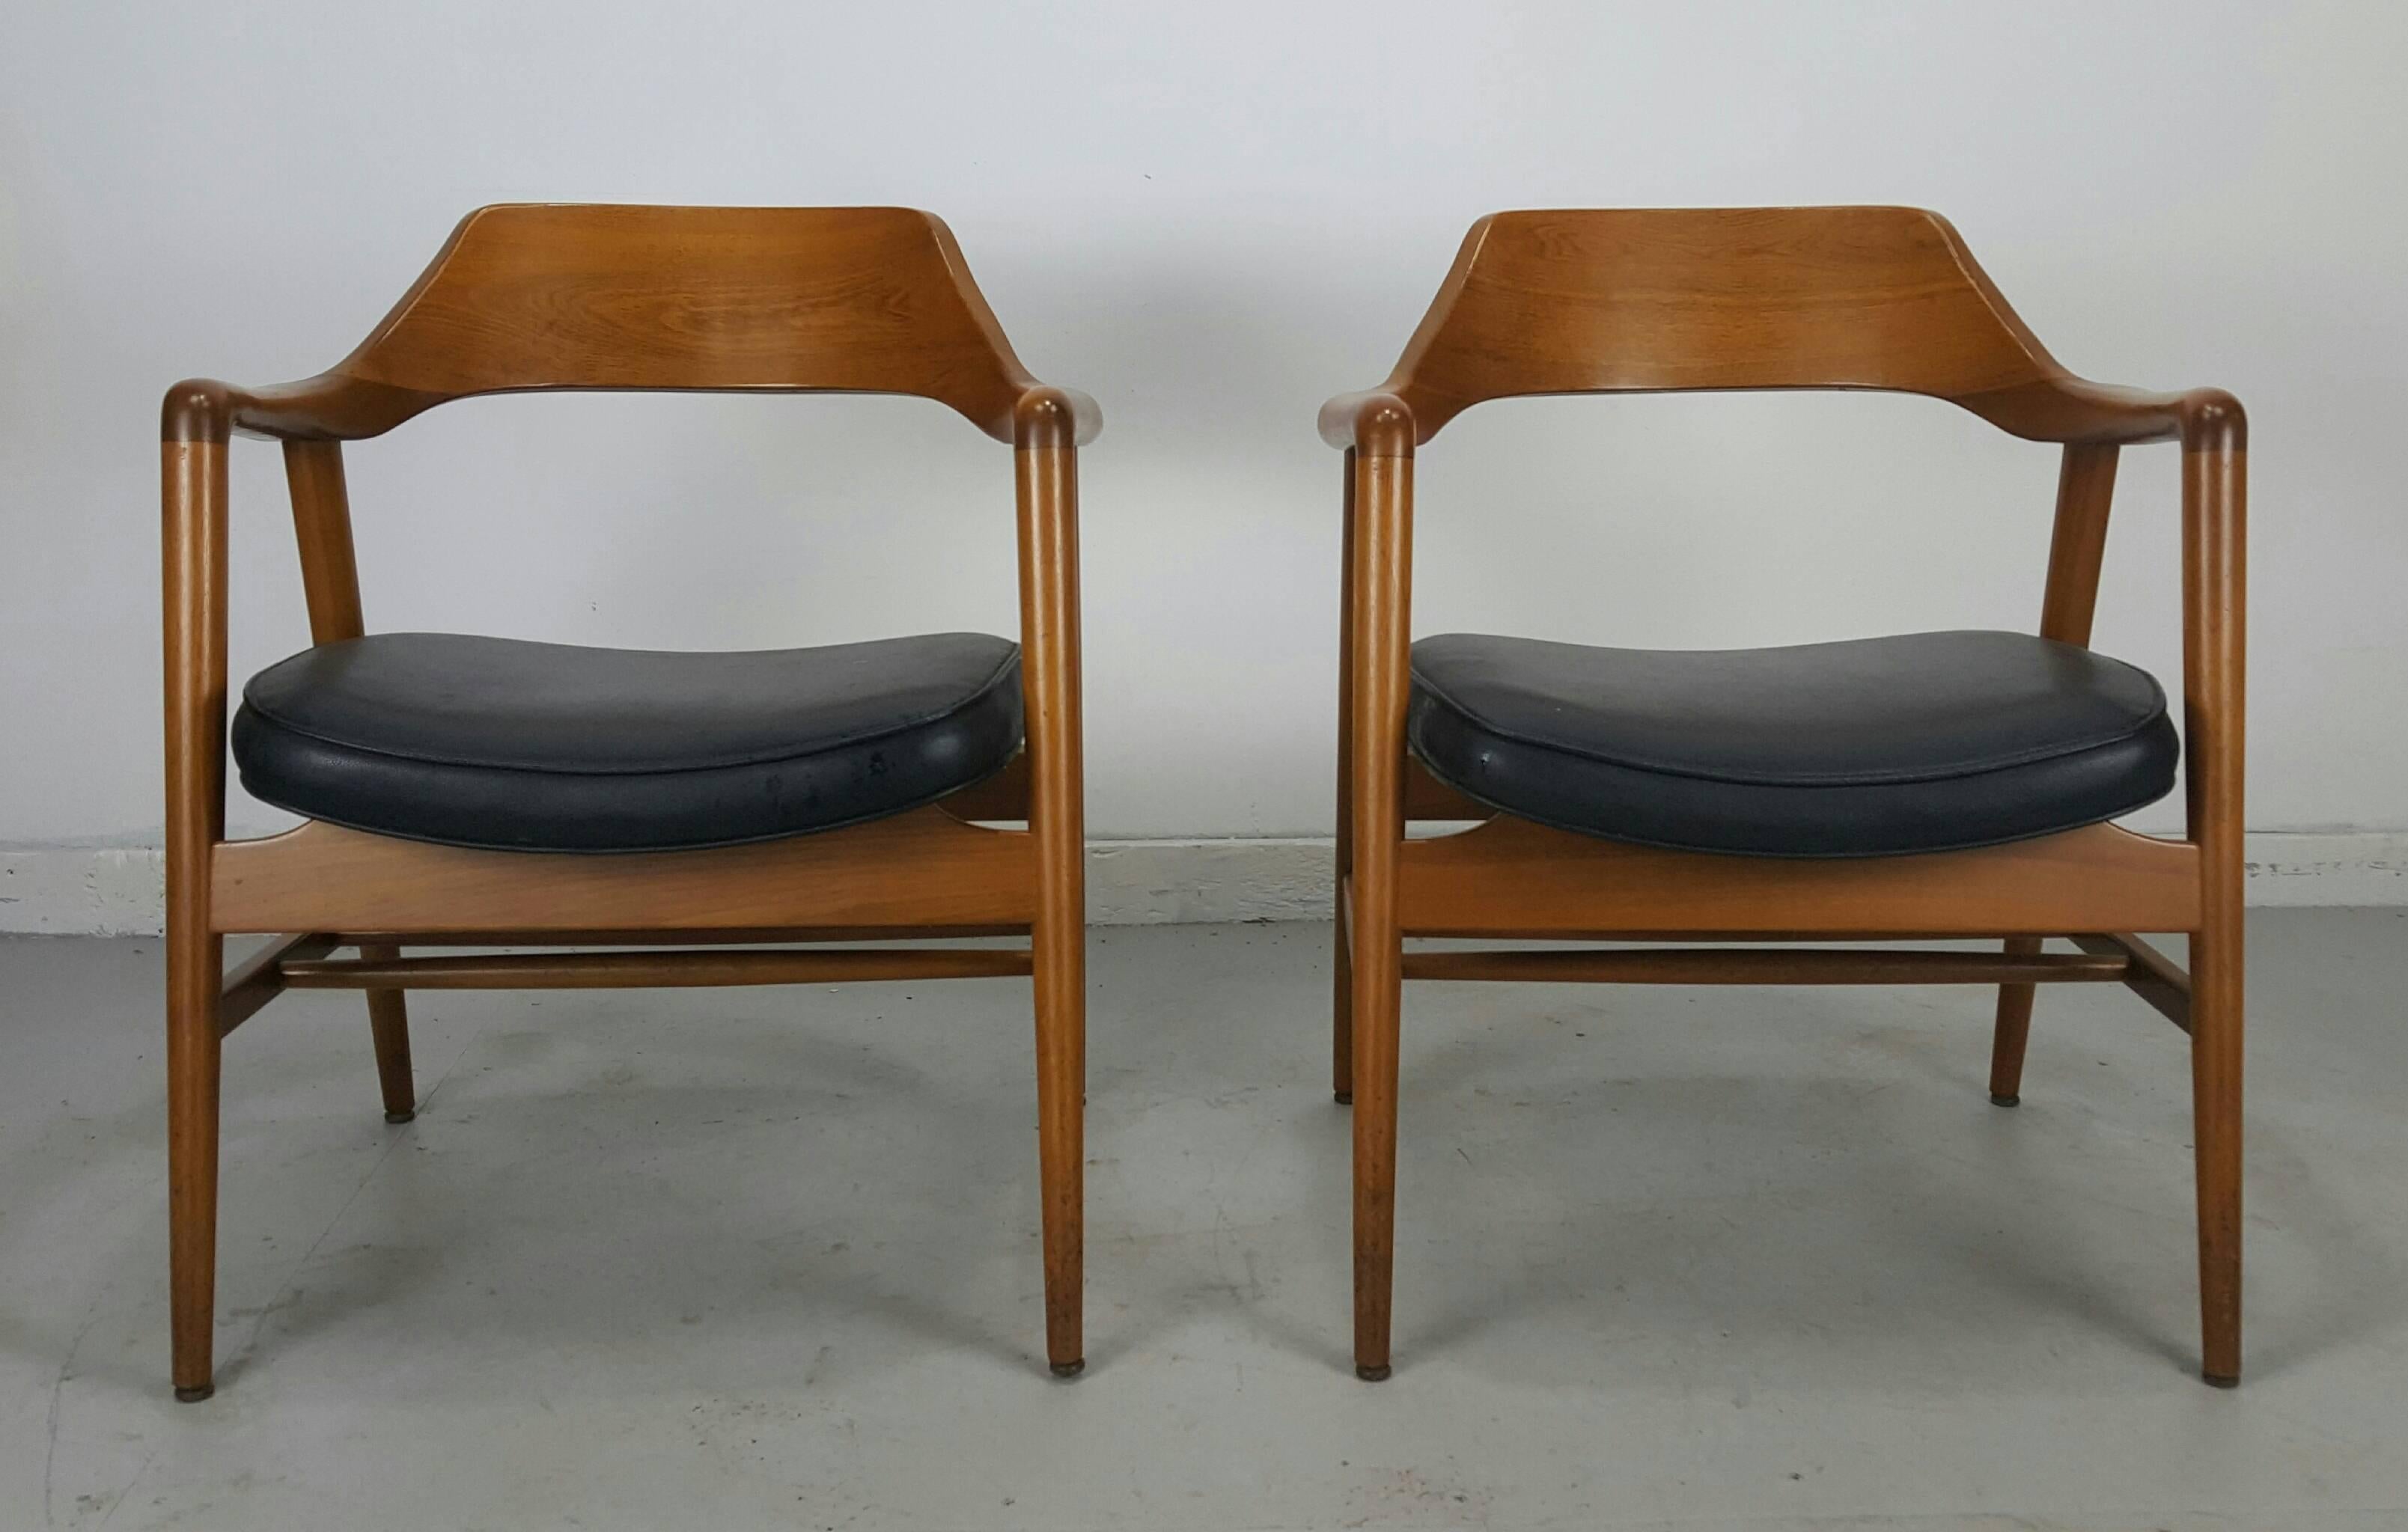 Set of eight sculptural solid walnut armchairs by Gunlock Classic modernist design. Exceptional quality and construction. Amazing original condition. Retains original black naugahyde seats. Measure 29.5" H x 24" W x 22" D. Arm height